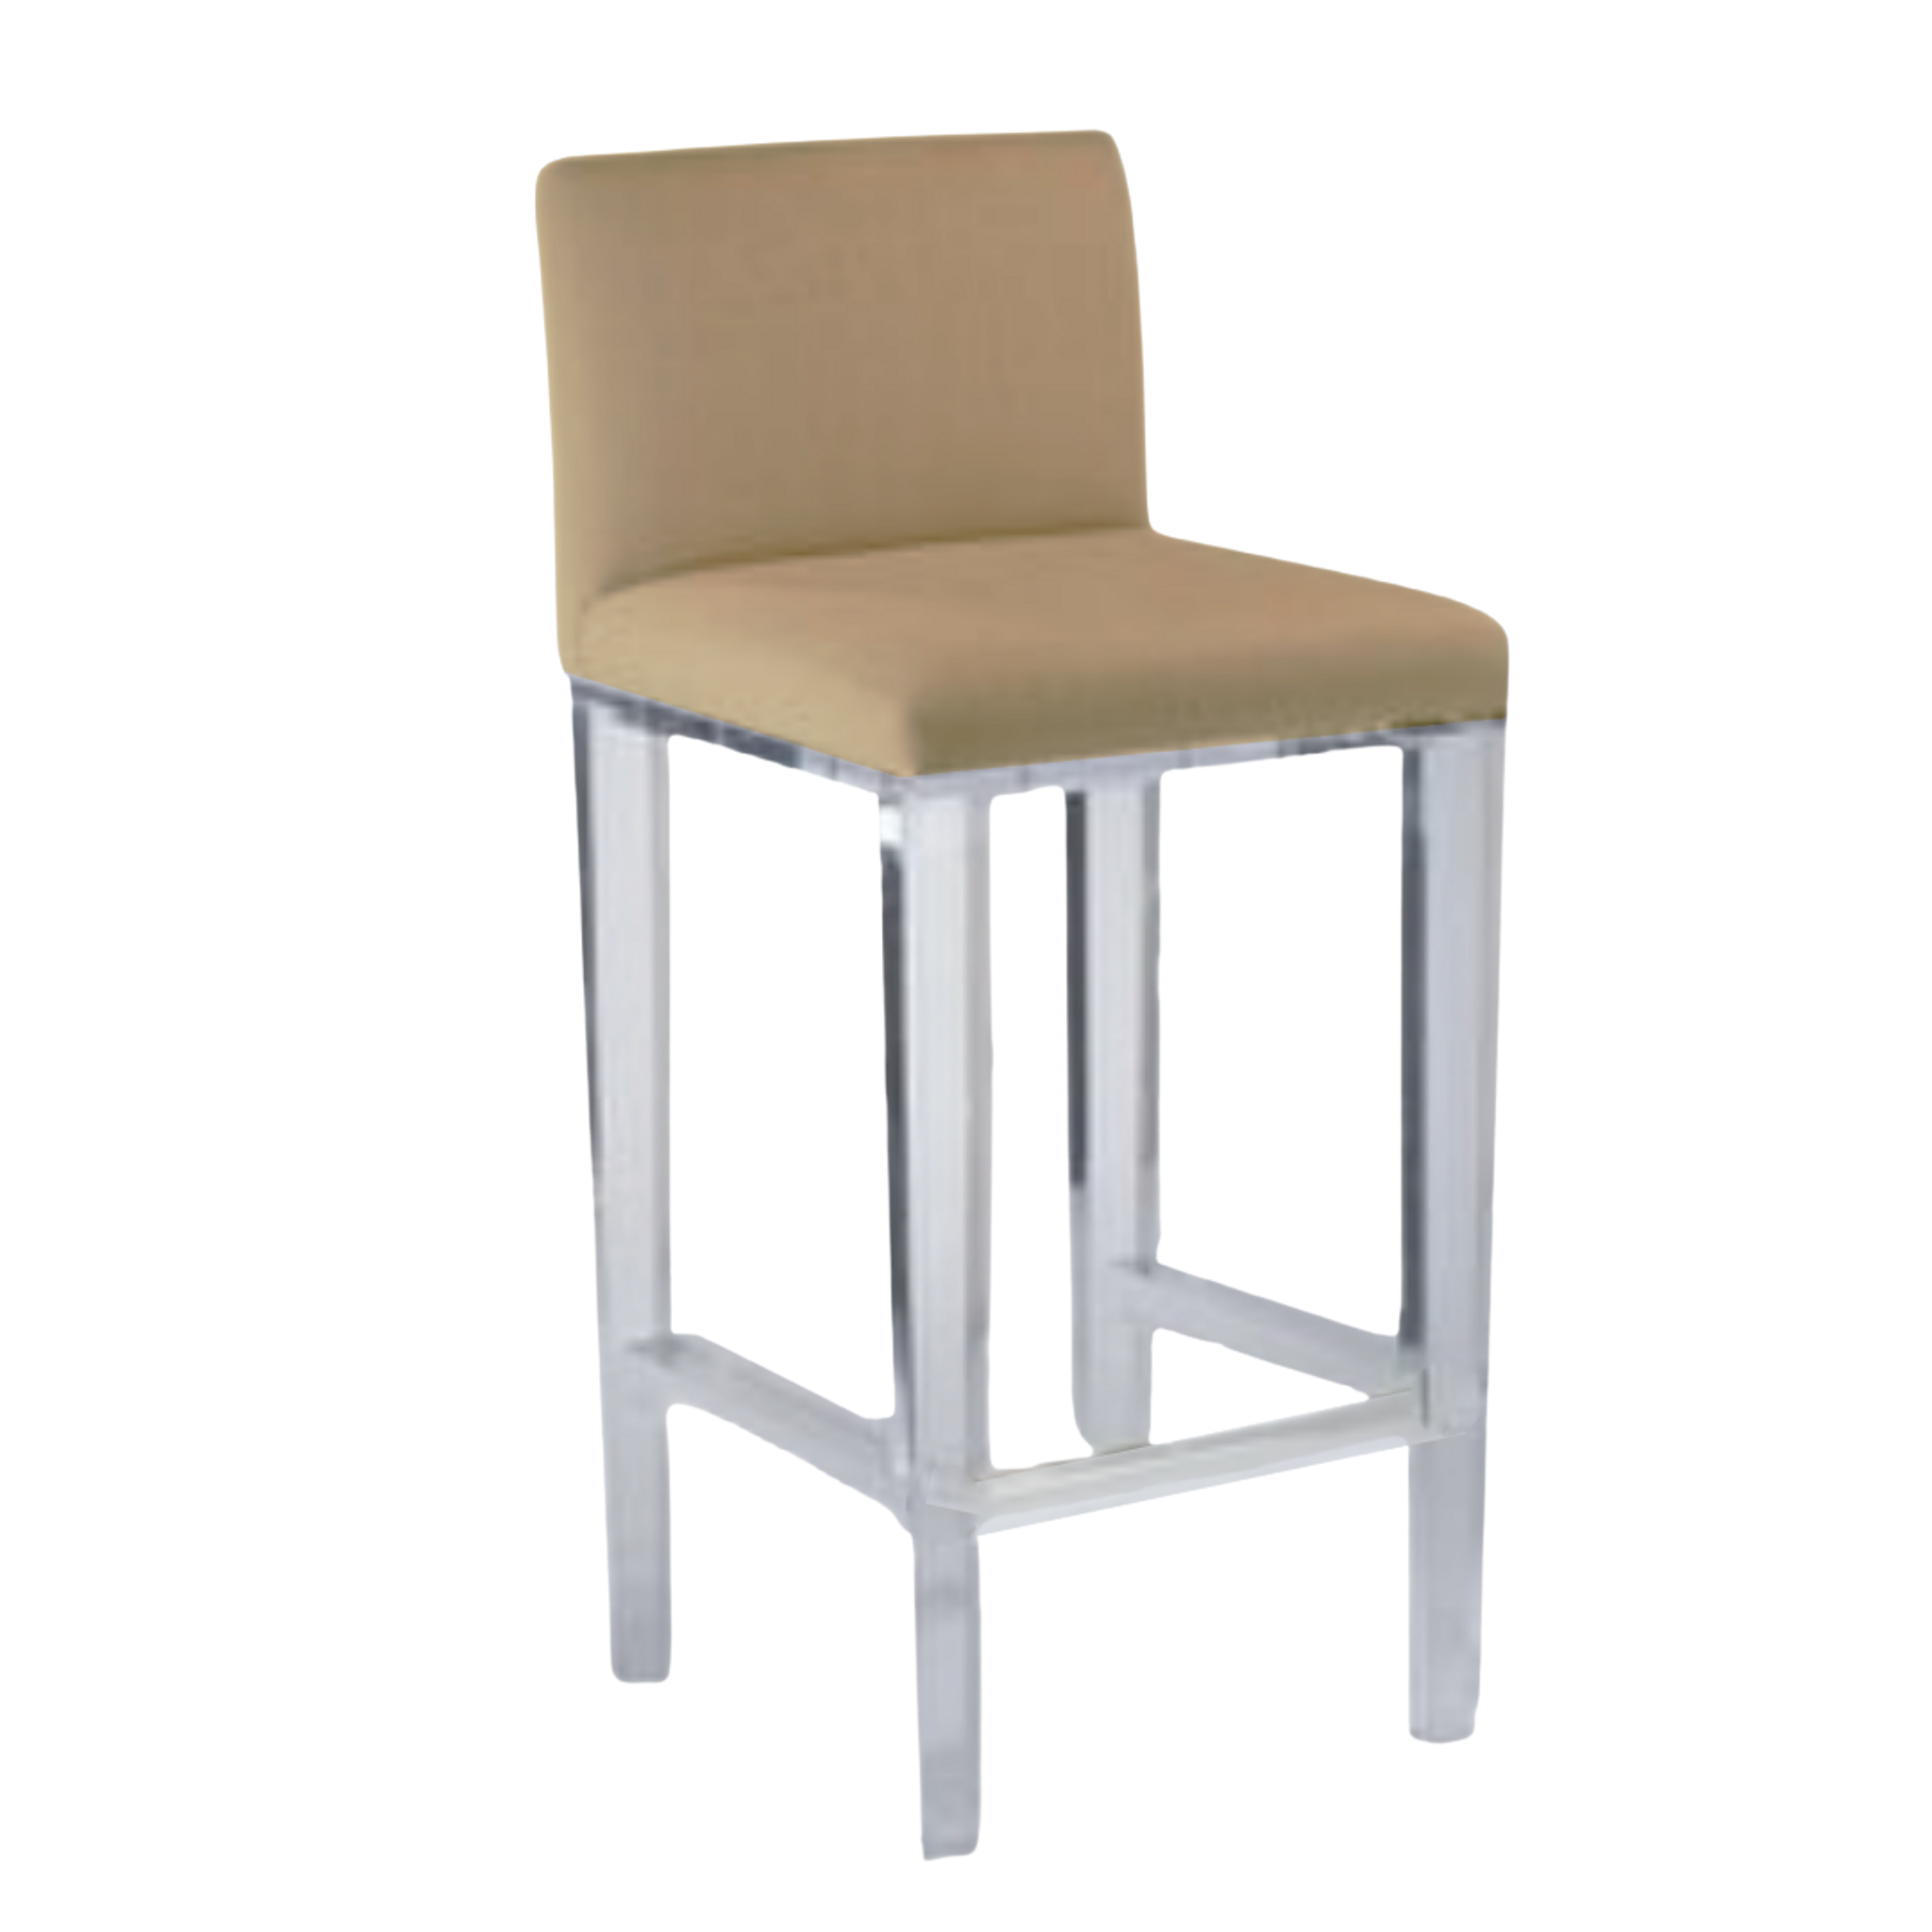 Lucite Square Back Barstool with Ultrasuede Upholstery